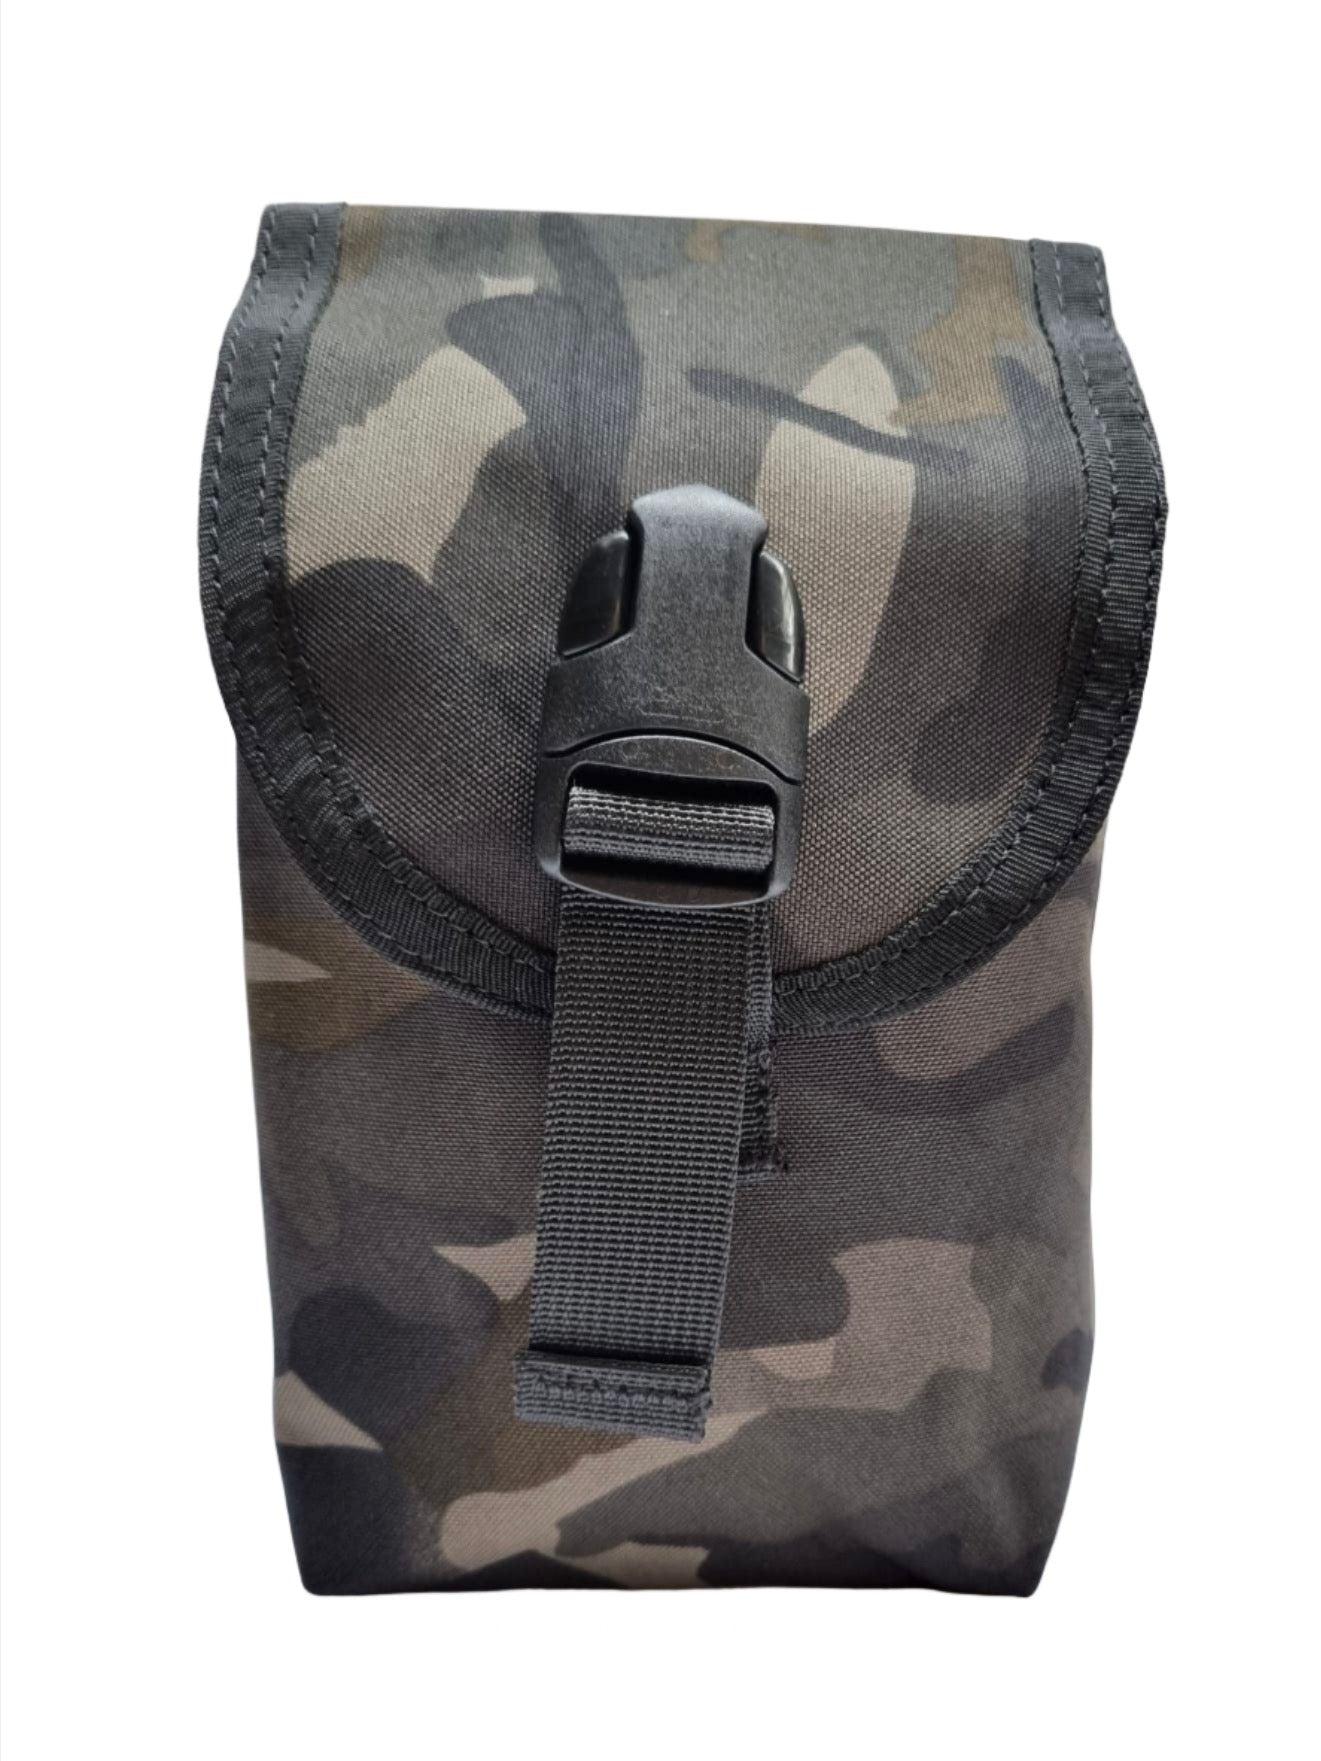 SHE-945 Medium Utility Pouch Colour UTP DarkNight front view.